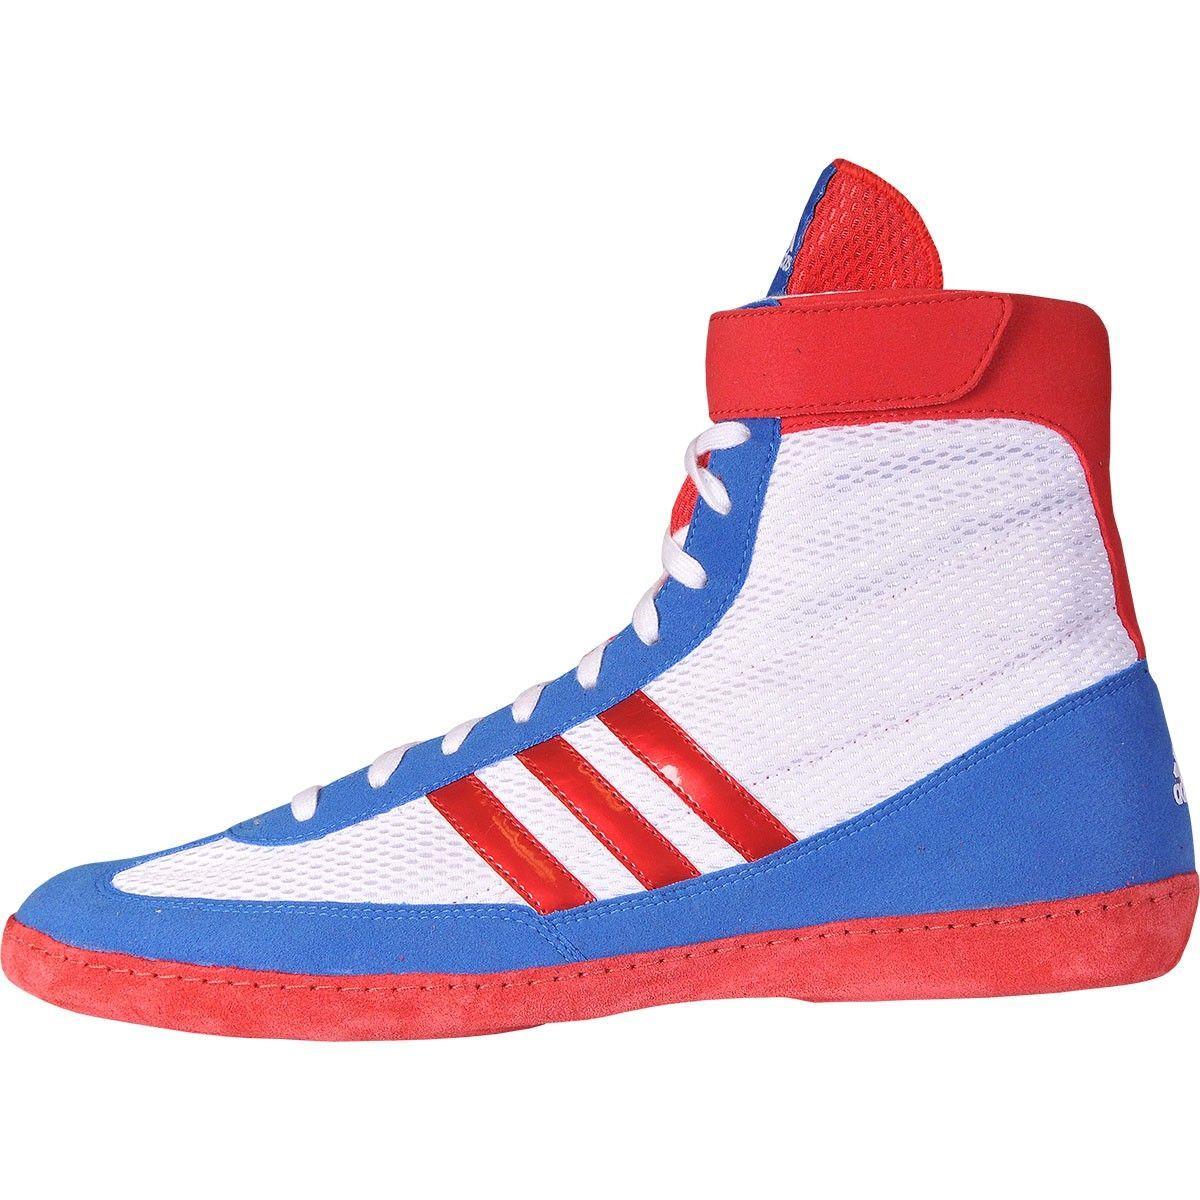 Red and Blue Wrestling Logo - Adidas Combat Speed 4 Red/White/Blue Wrestling Sho - Martial Art ...